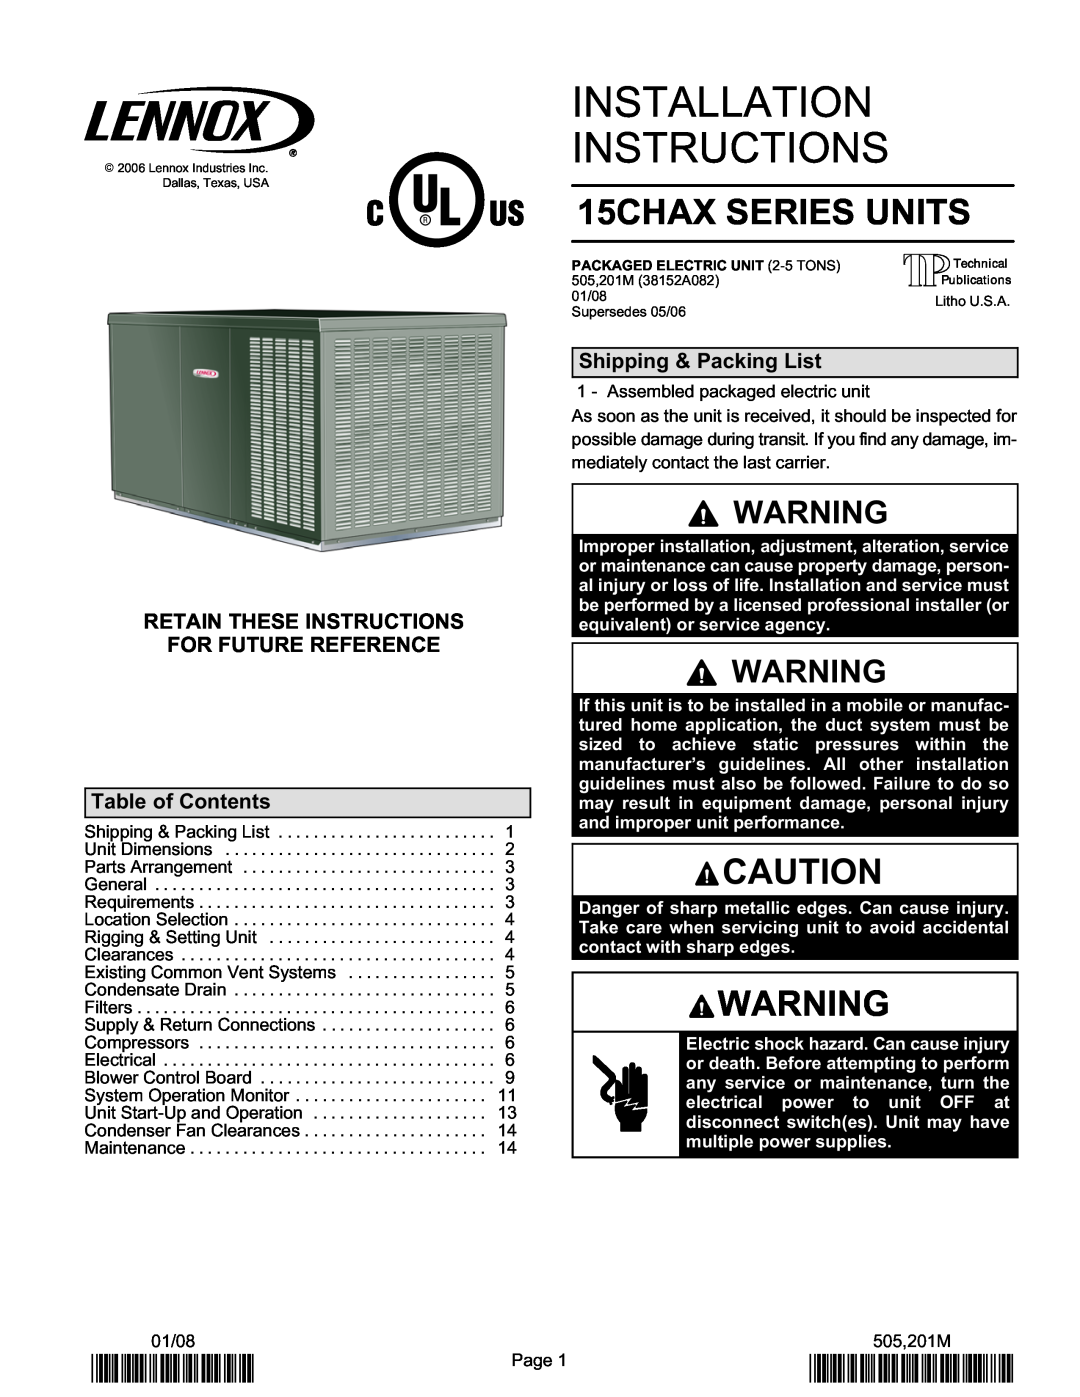 Lennox International Inc 15CHAX Series installation instructions Retain These Instructions For Future Reference, 2P0108 